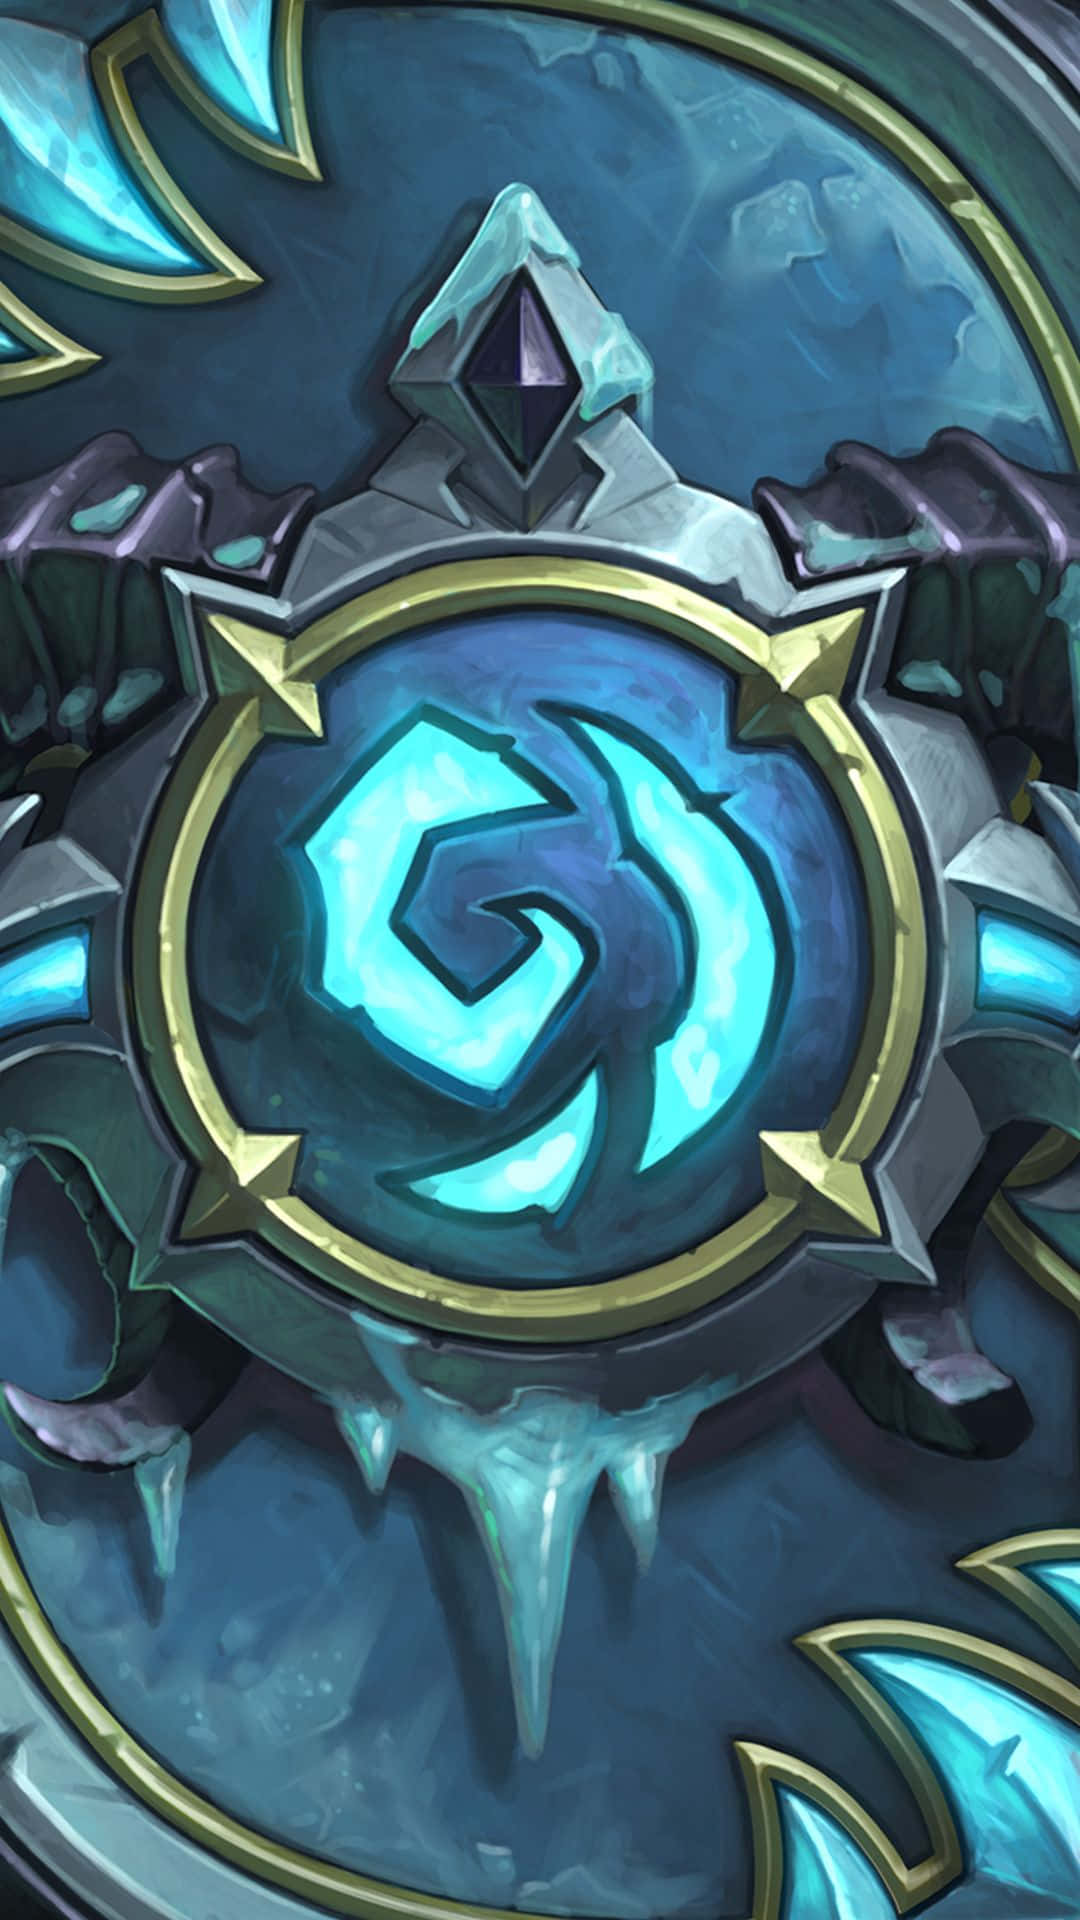 Android Hearthstone Frostmourne Card Baggrund Tapet: